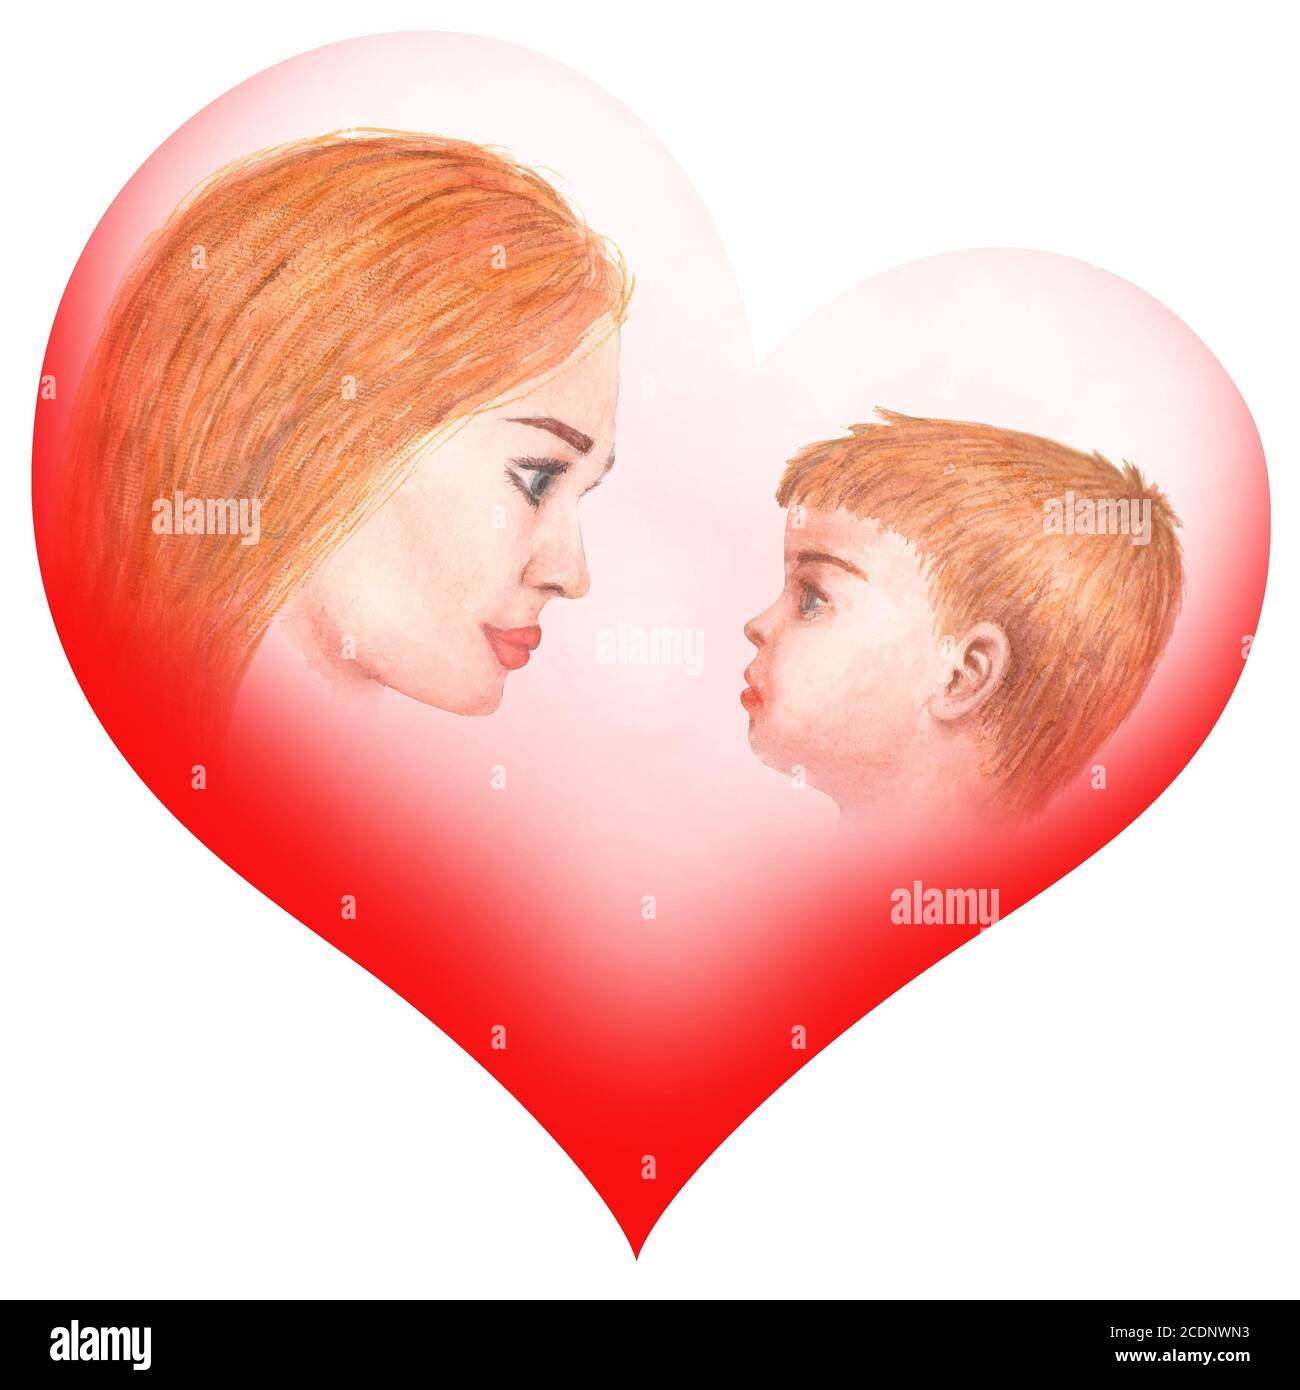 Heart Shaped Template Print from c8.alamy.com